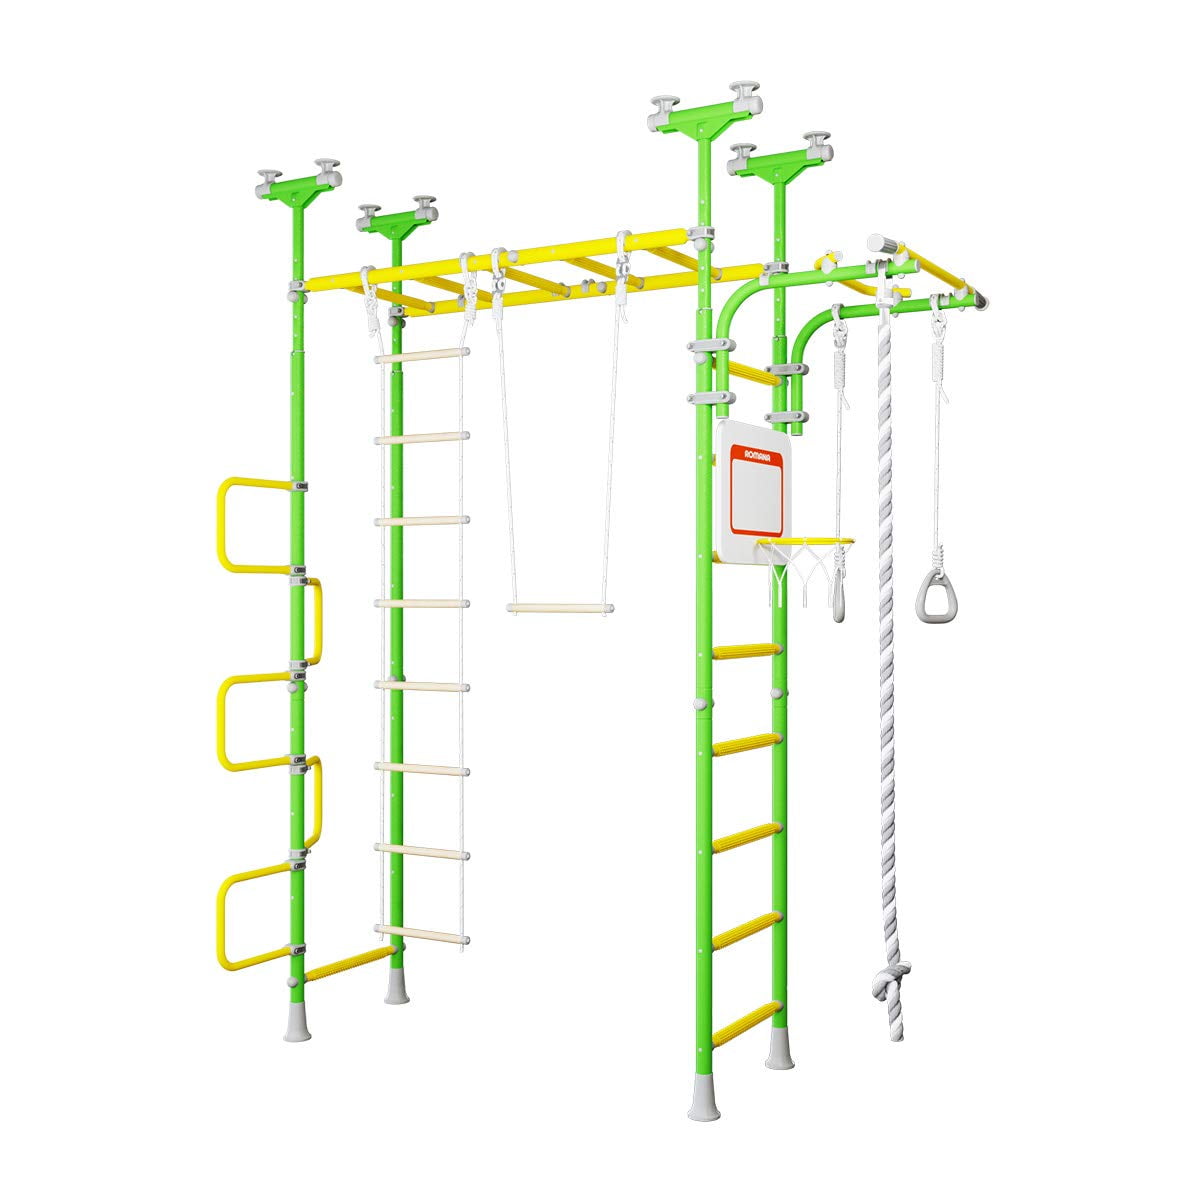 Vertical-4 Kids Home Gym Swedish Wall Indoor Playground with Swing and others 